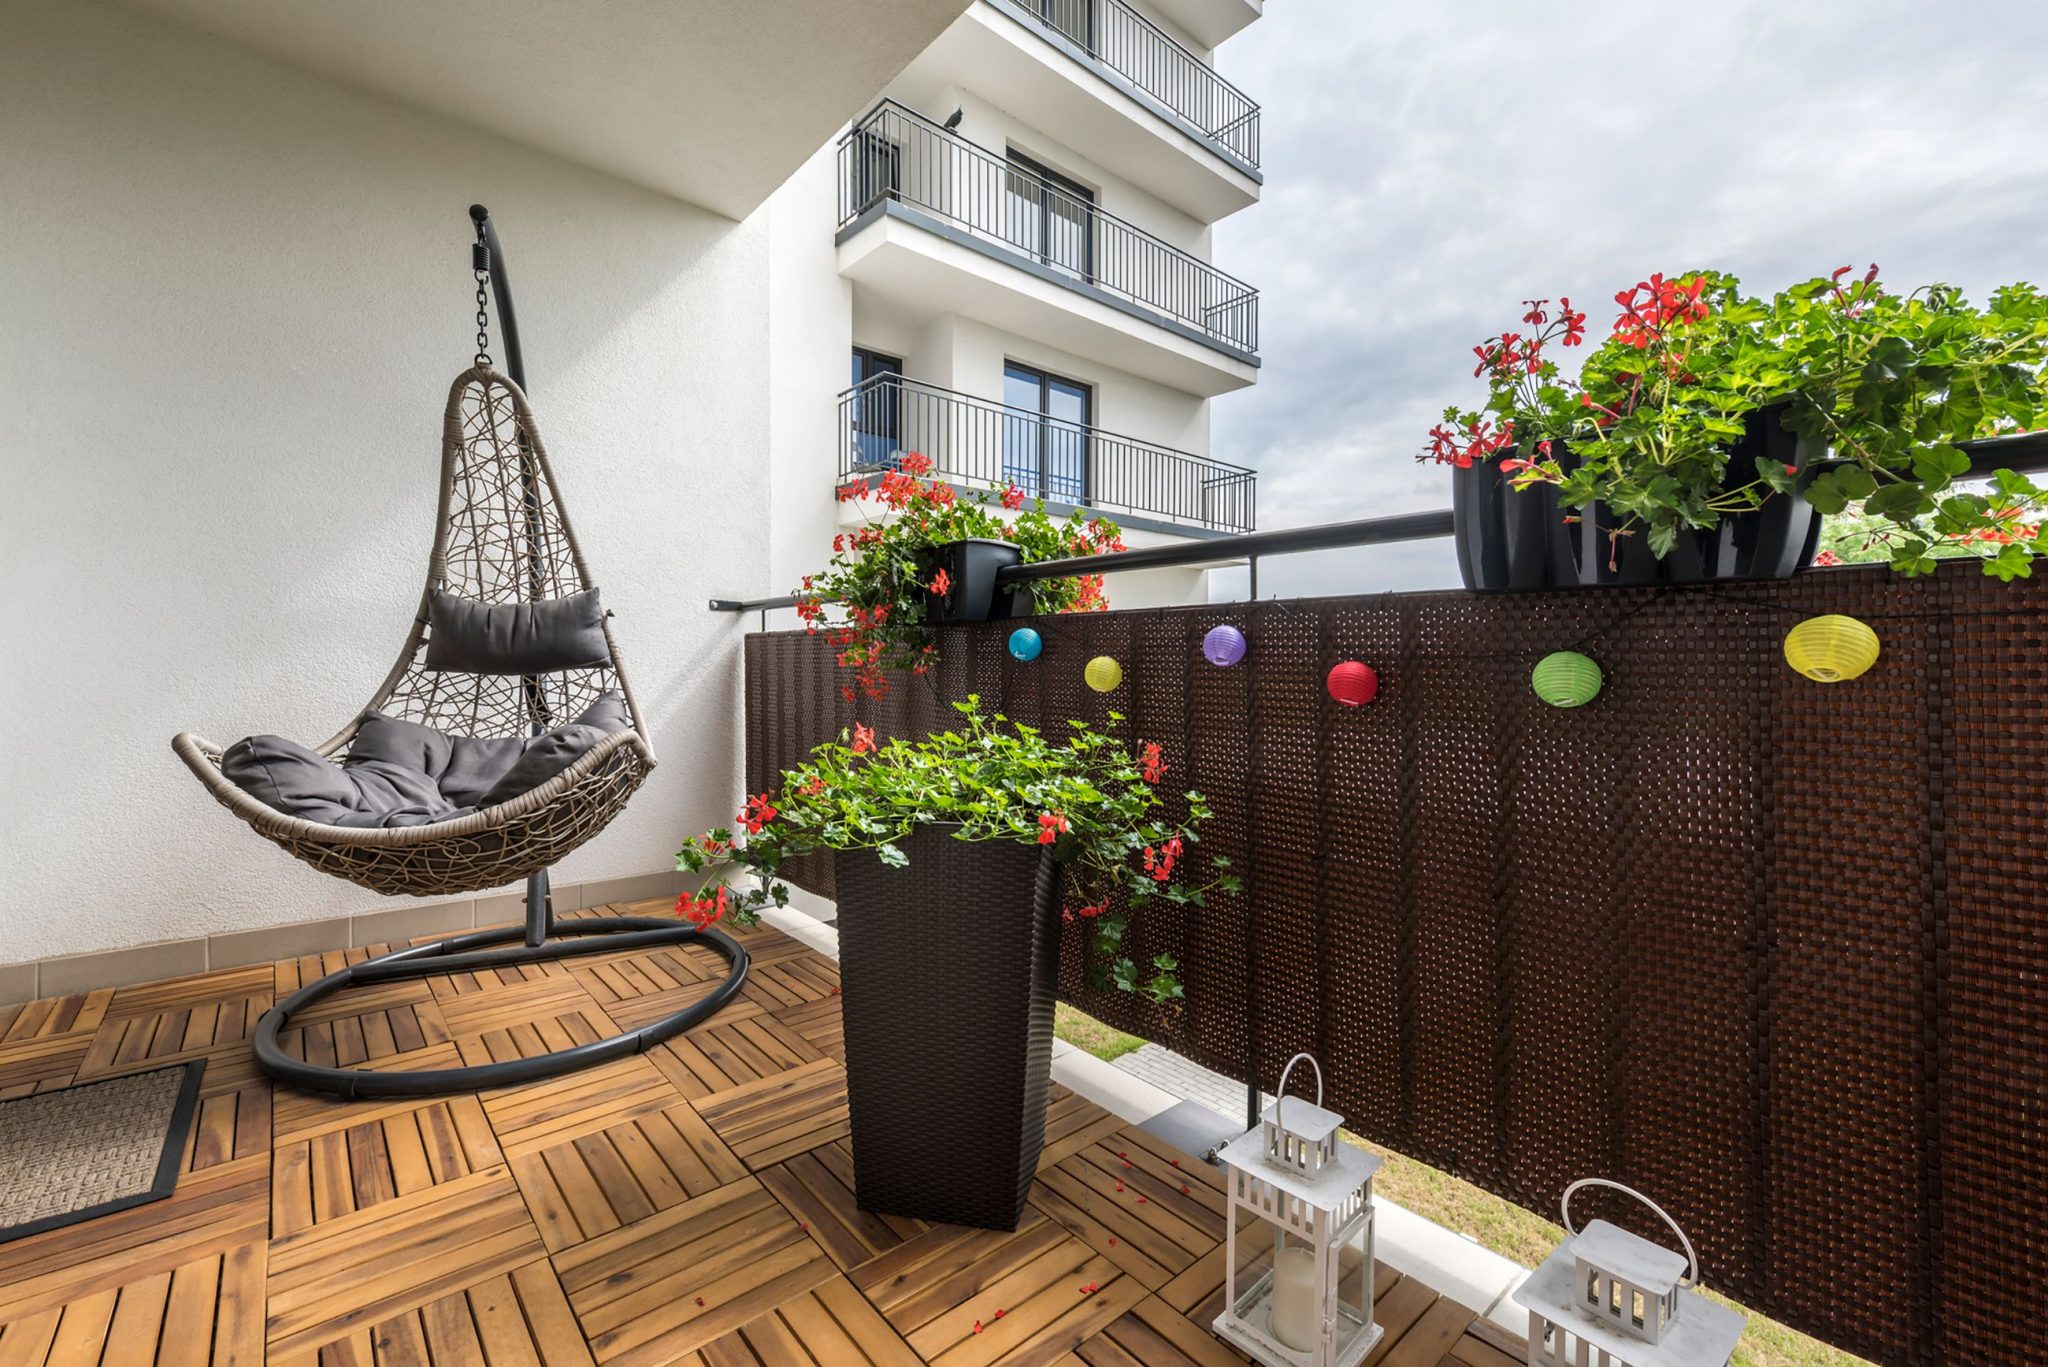 Top 9 Tips for Decorating a Glass Balcony - Balcony Boss